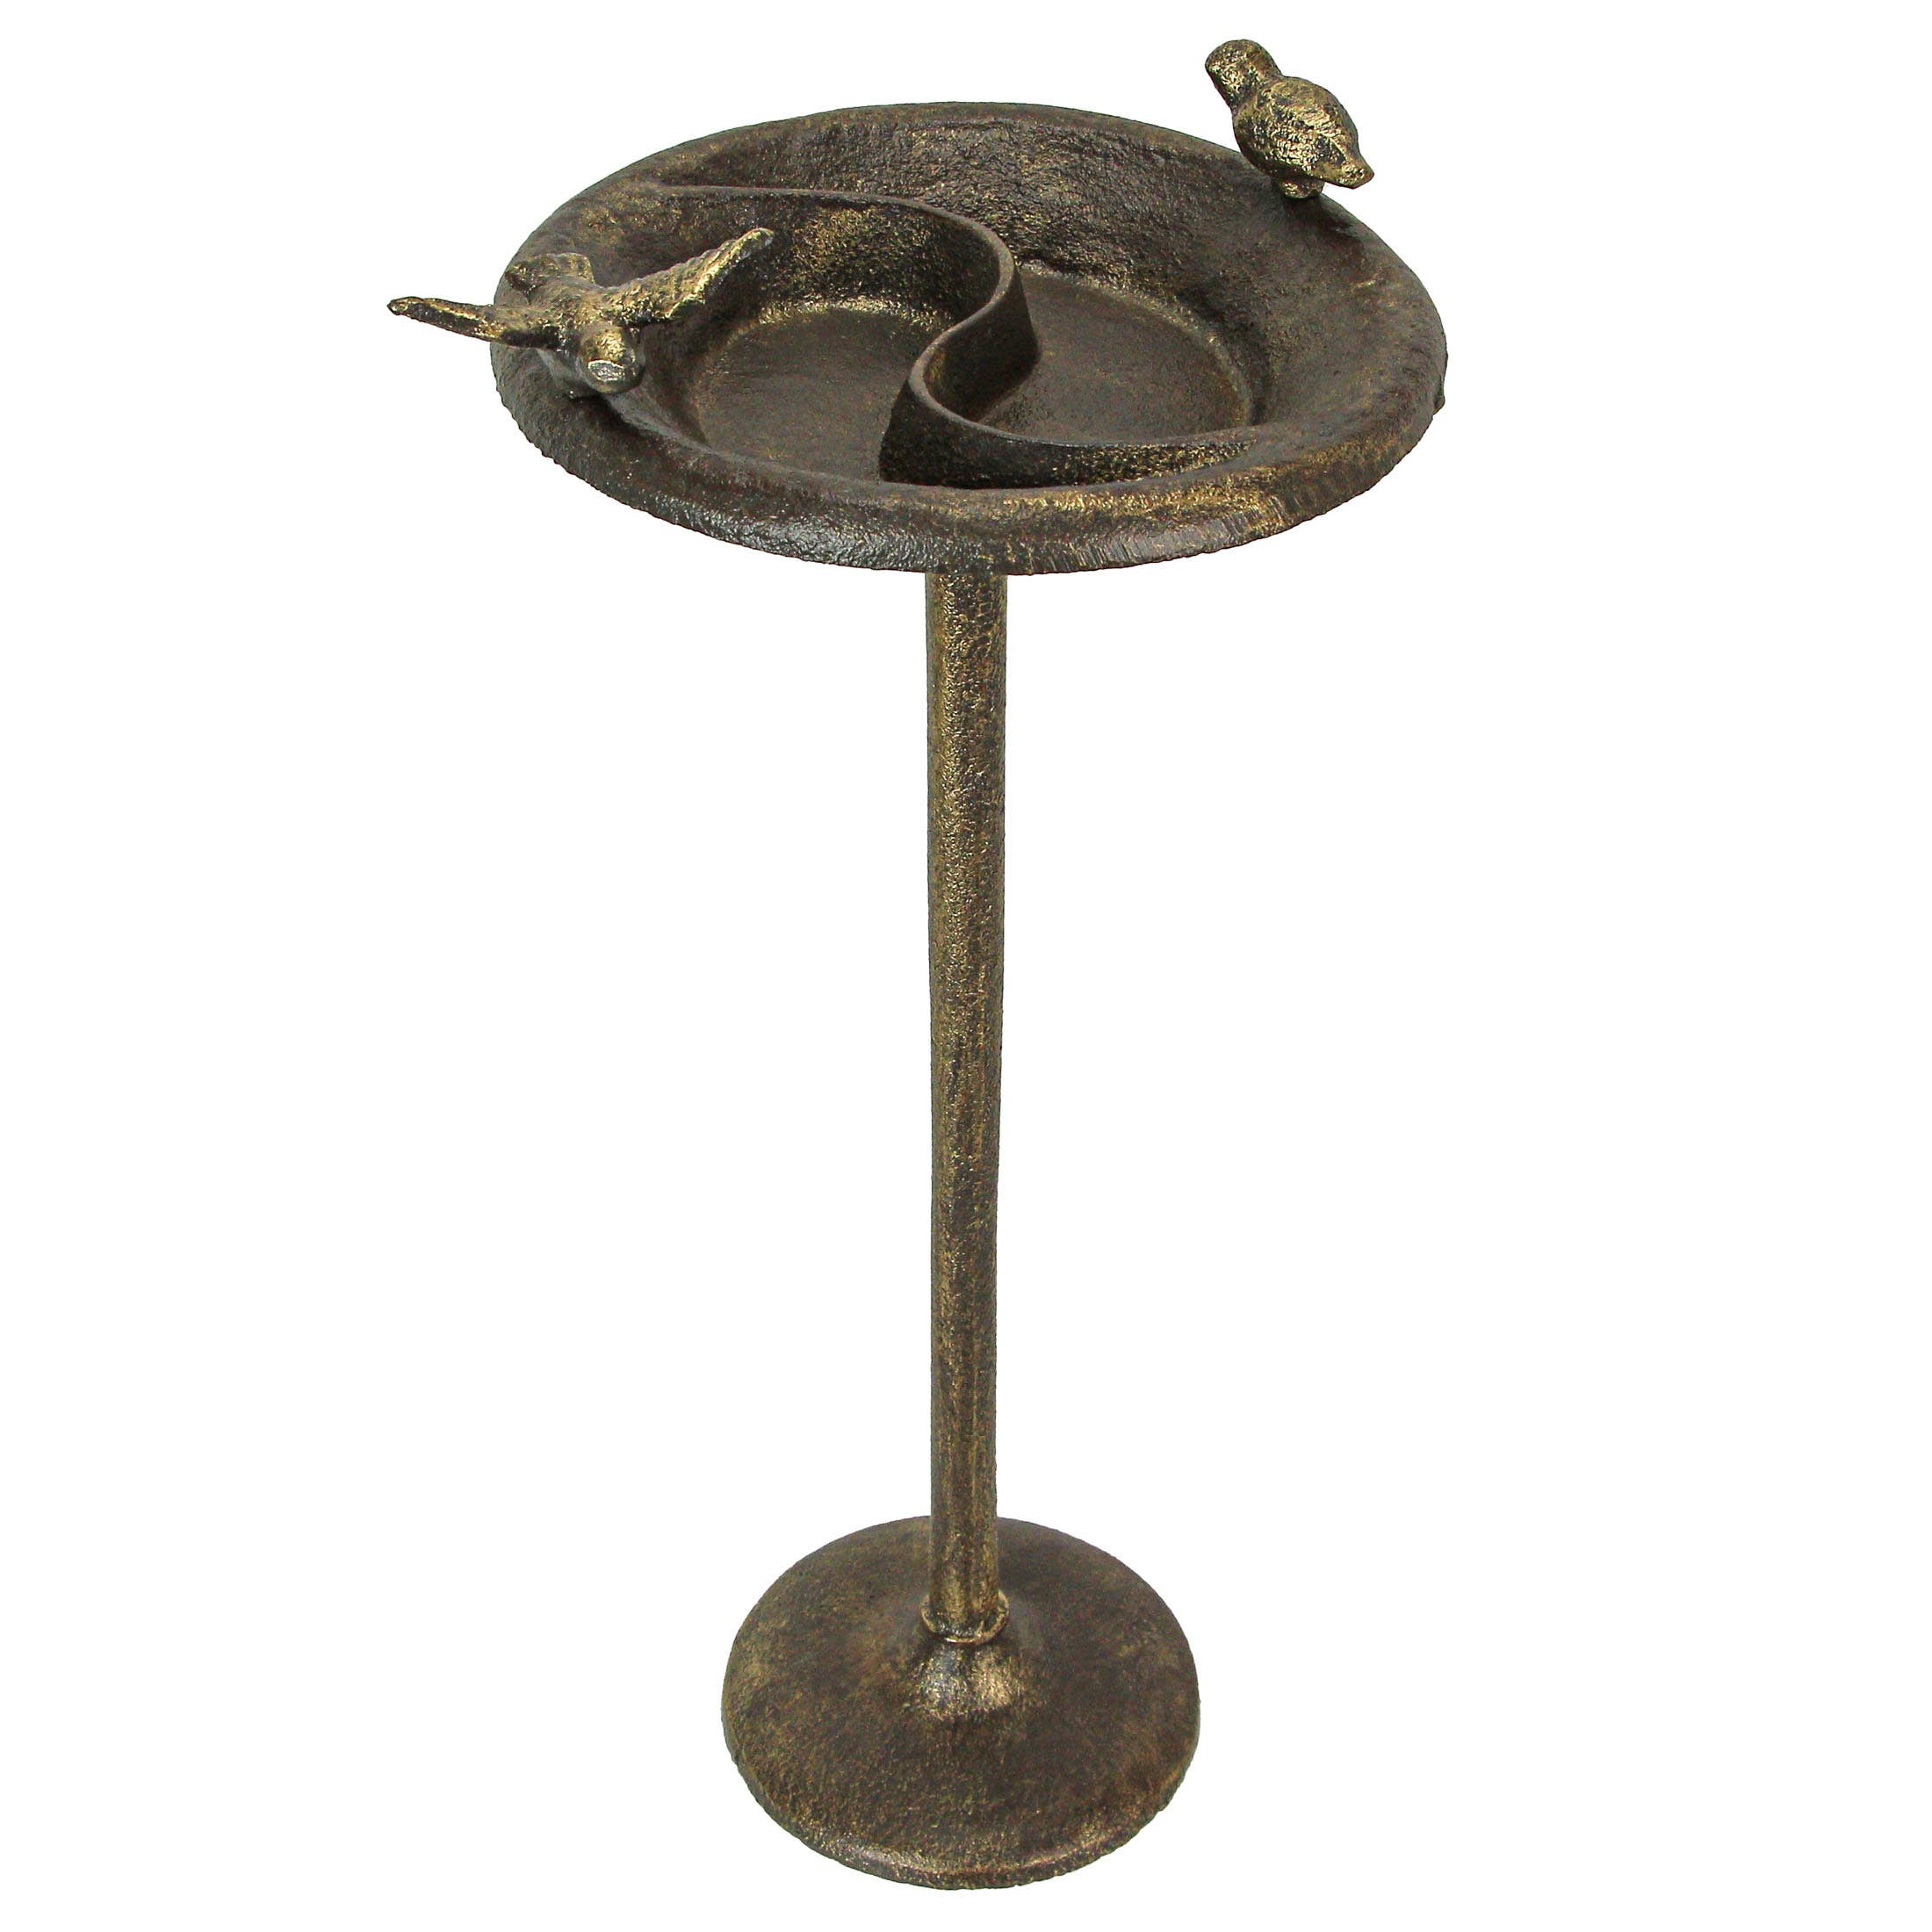 Purchase Wholesale cast iron birds. Free Returns & Net 60 Terms on